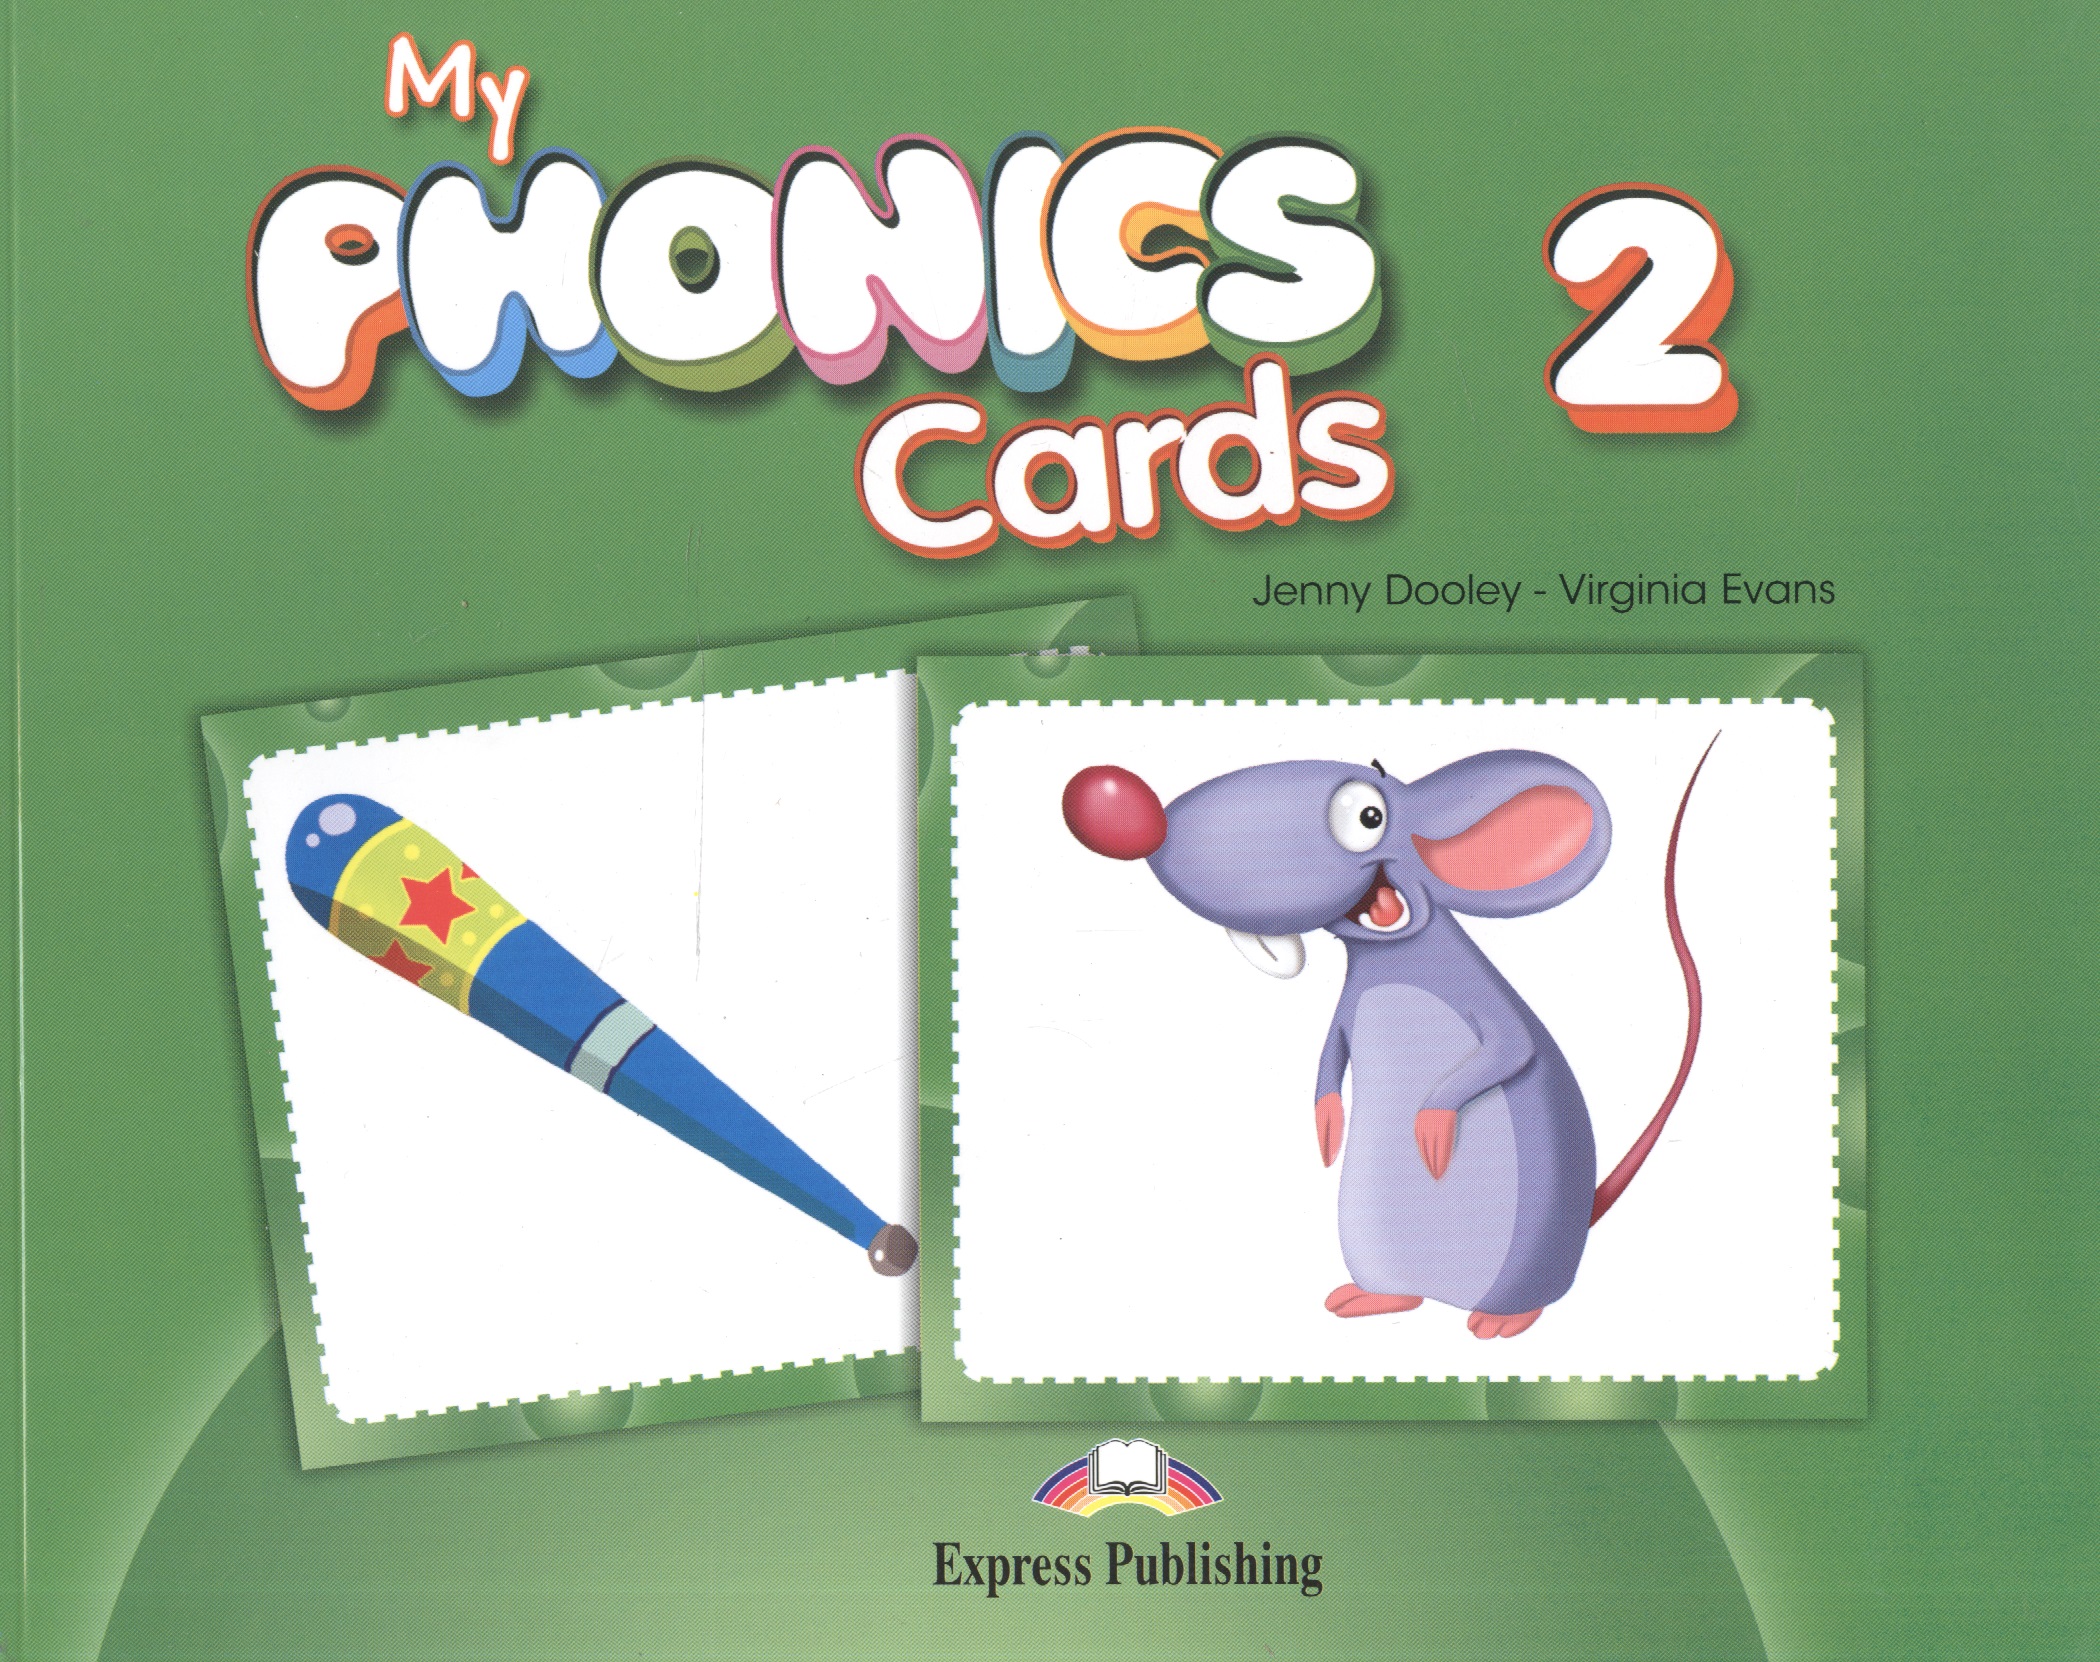 My Phonics 2. Cards team together 2 word cards